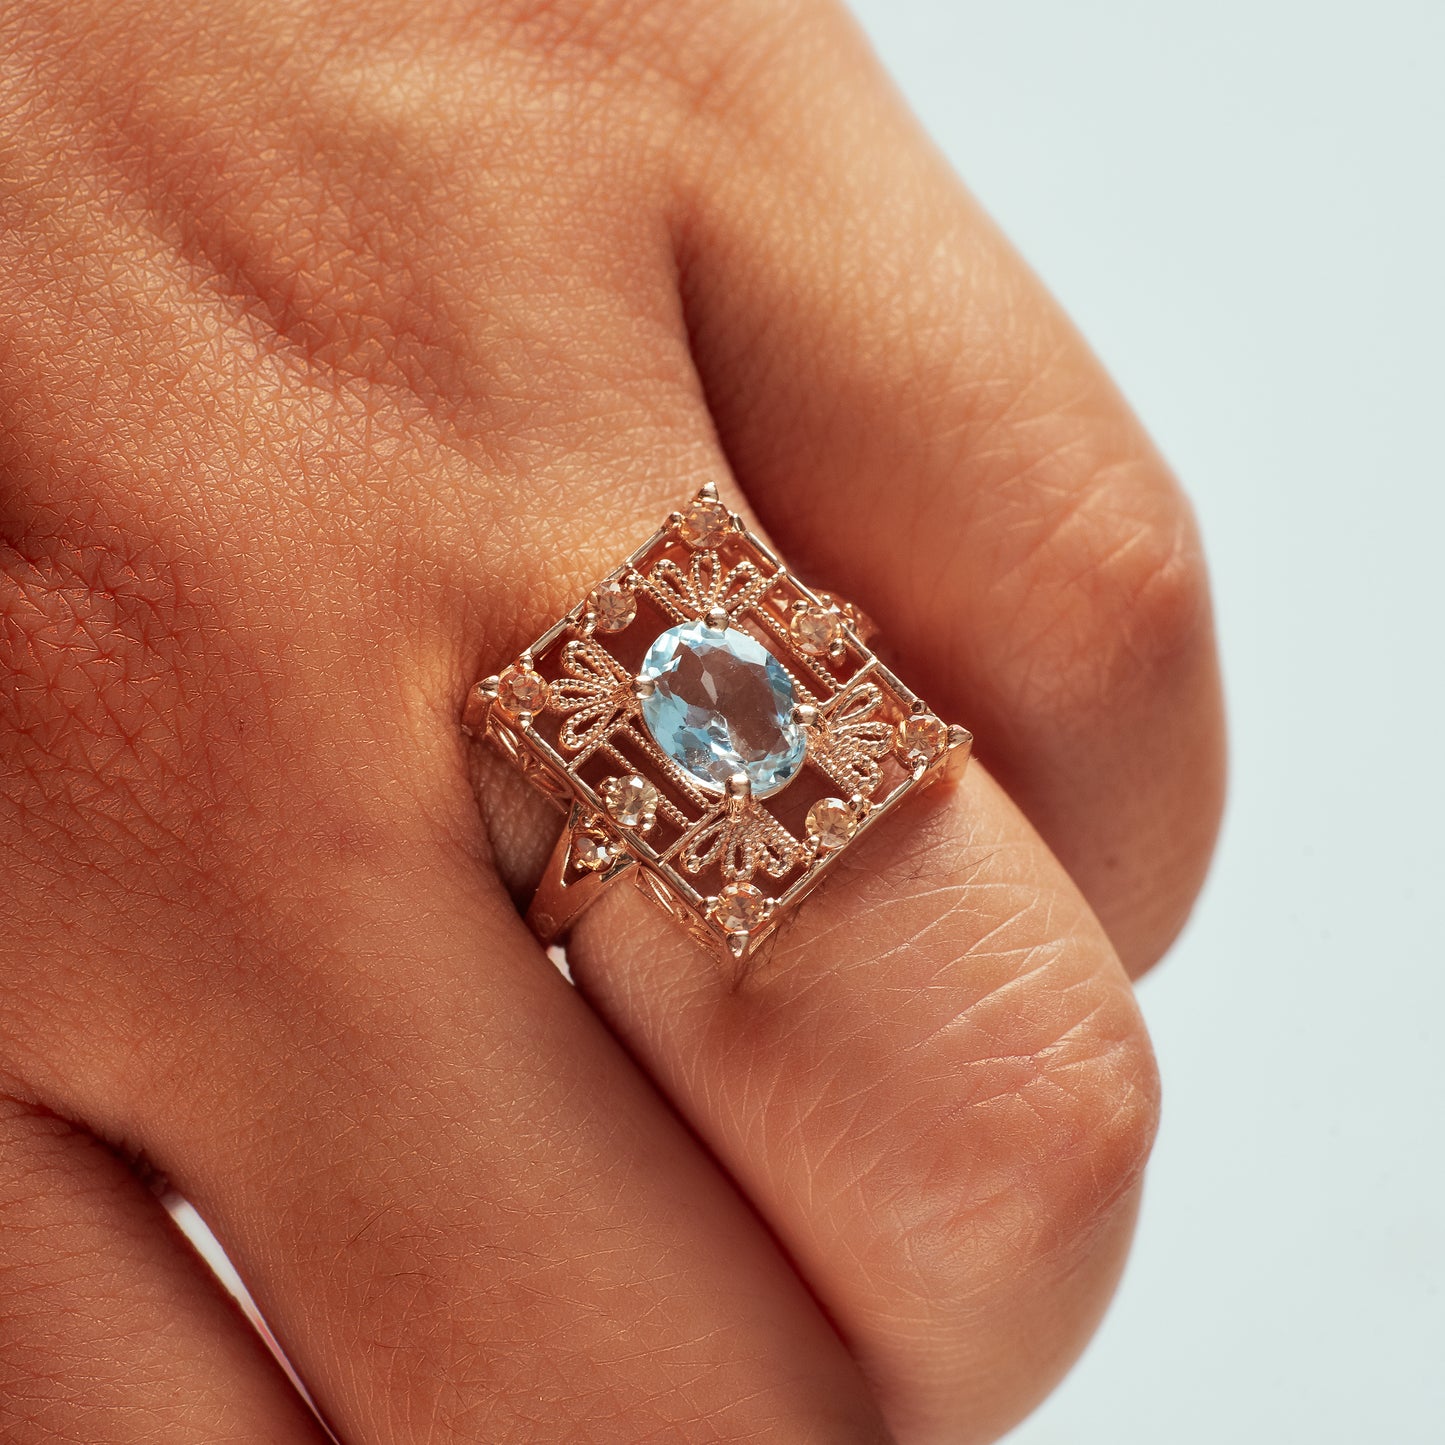 Load image into Gallery viewer, 14k rose gold rectangle shaped ring with detailed metalwork, champagne diamonds, and an aquamarine center stone modeled on hand.
